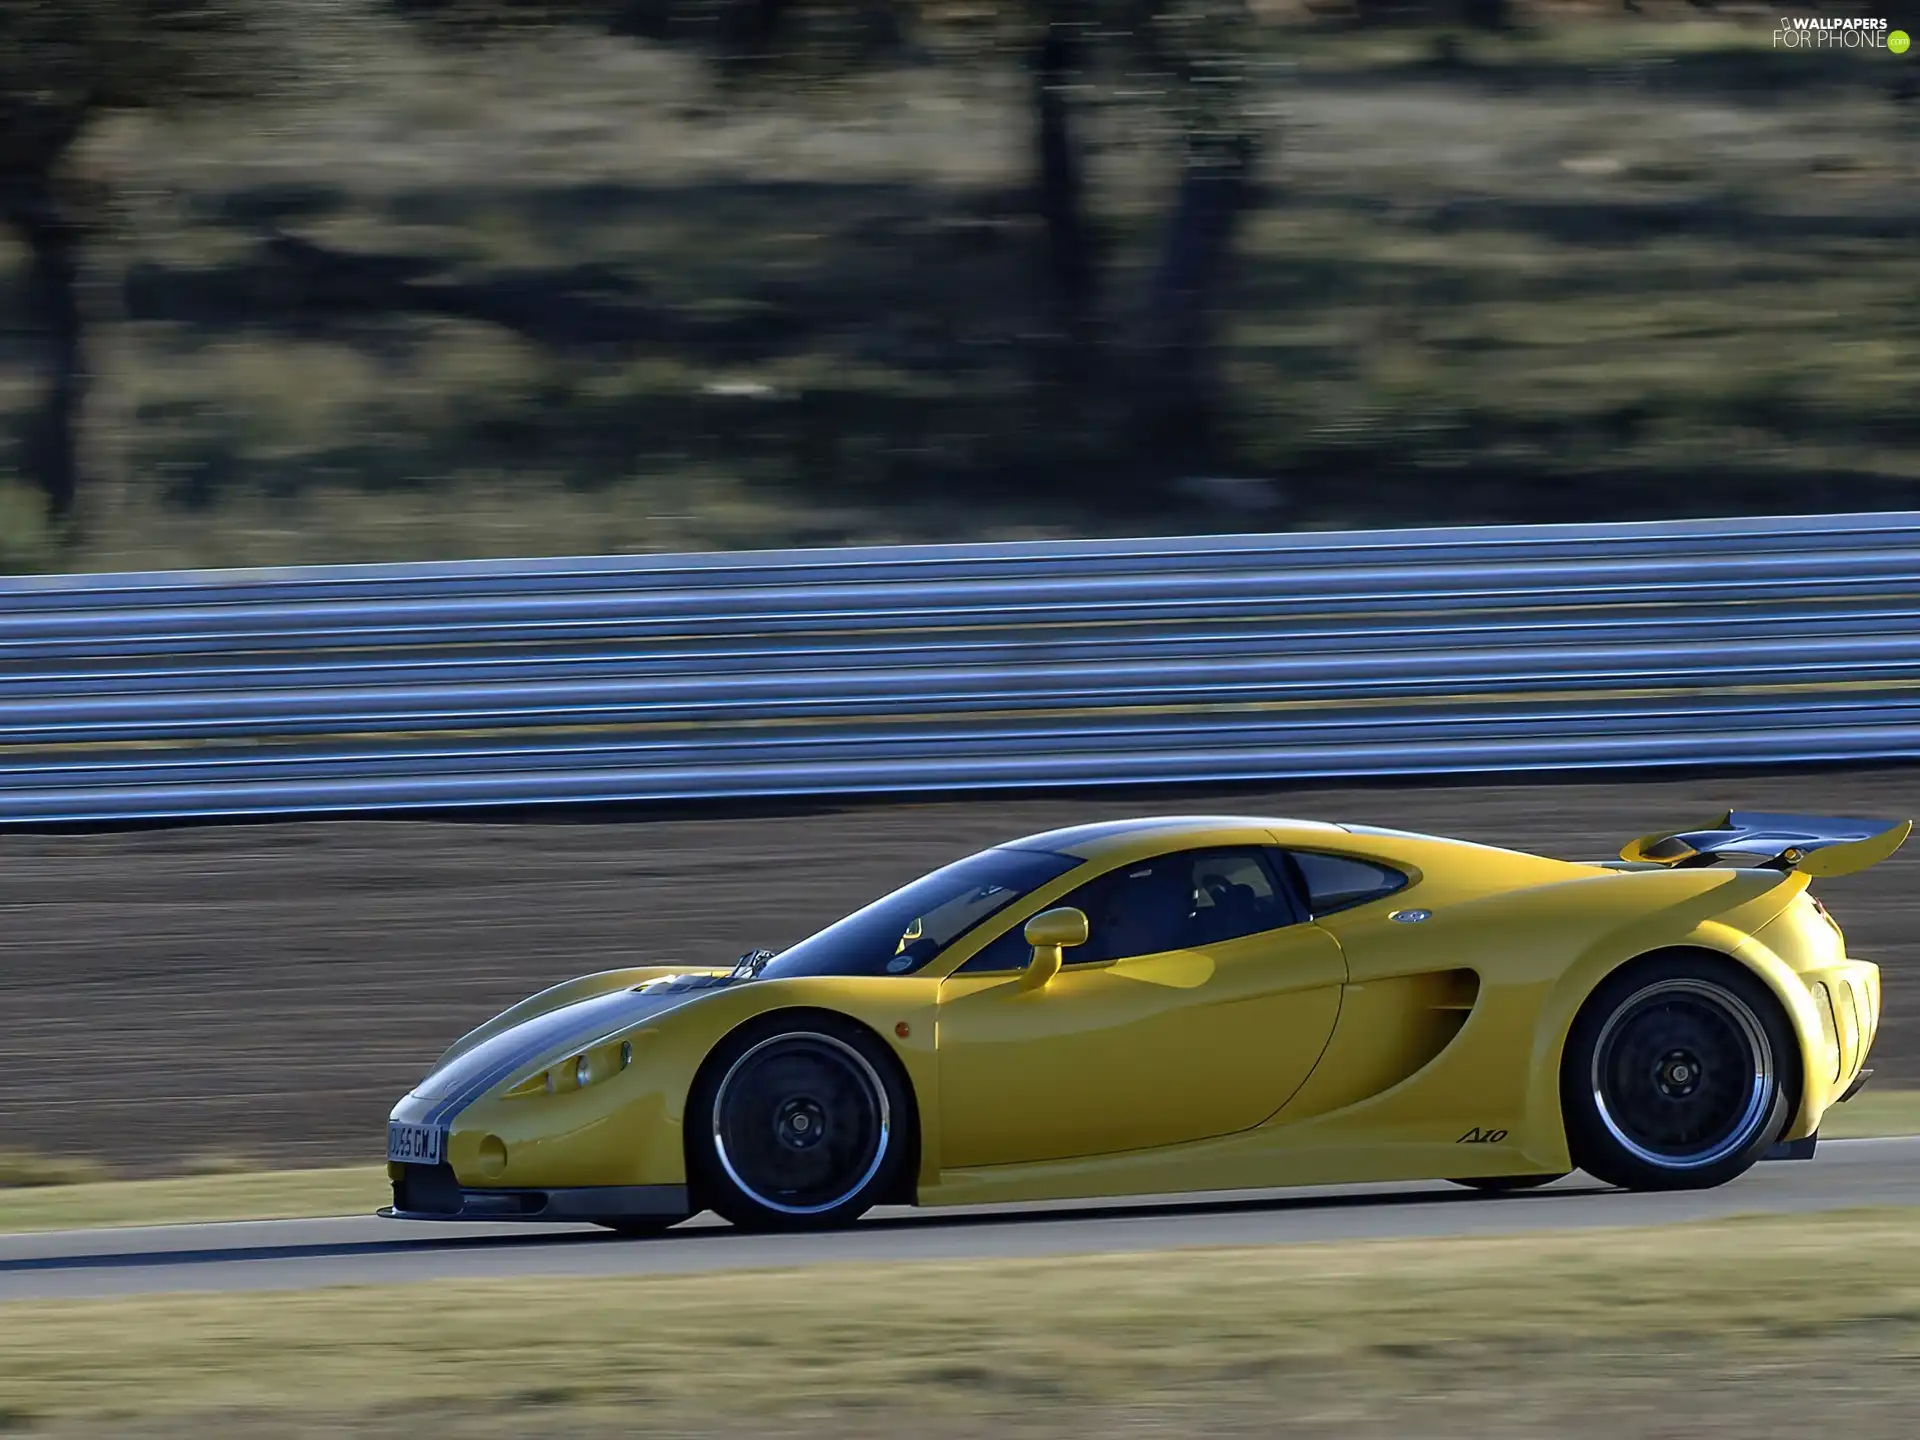 traction, Ascari A10, Properties